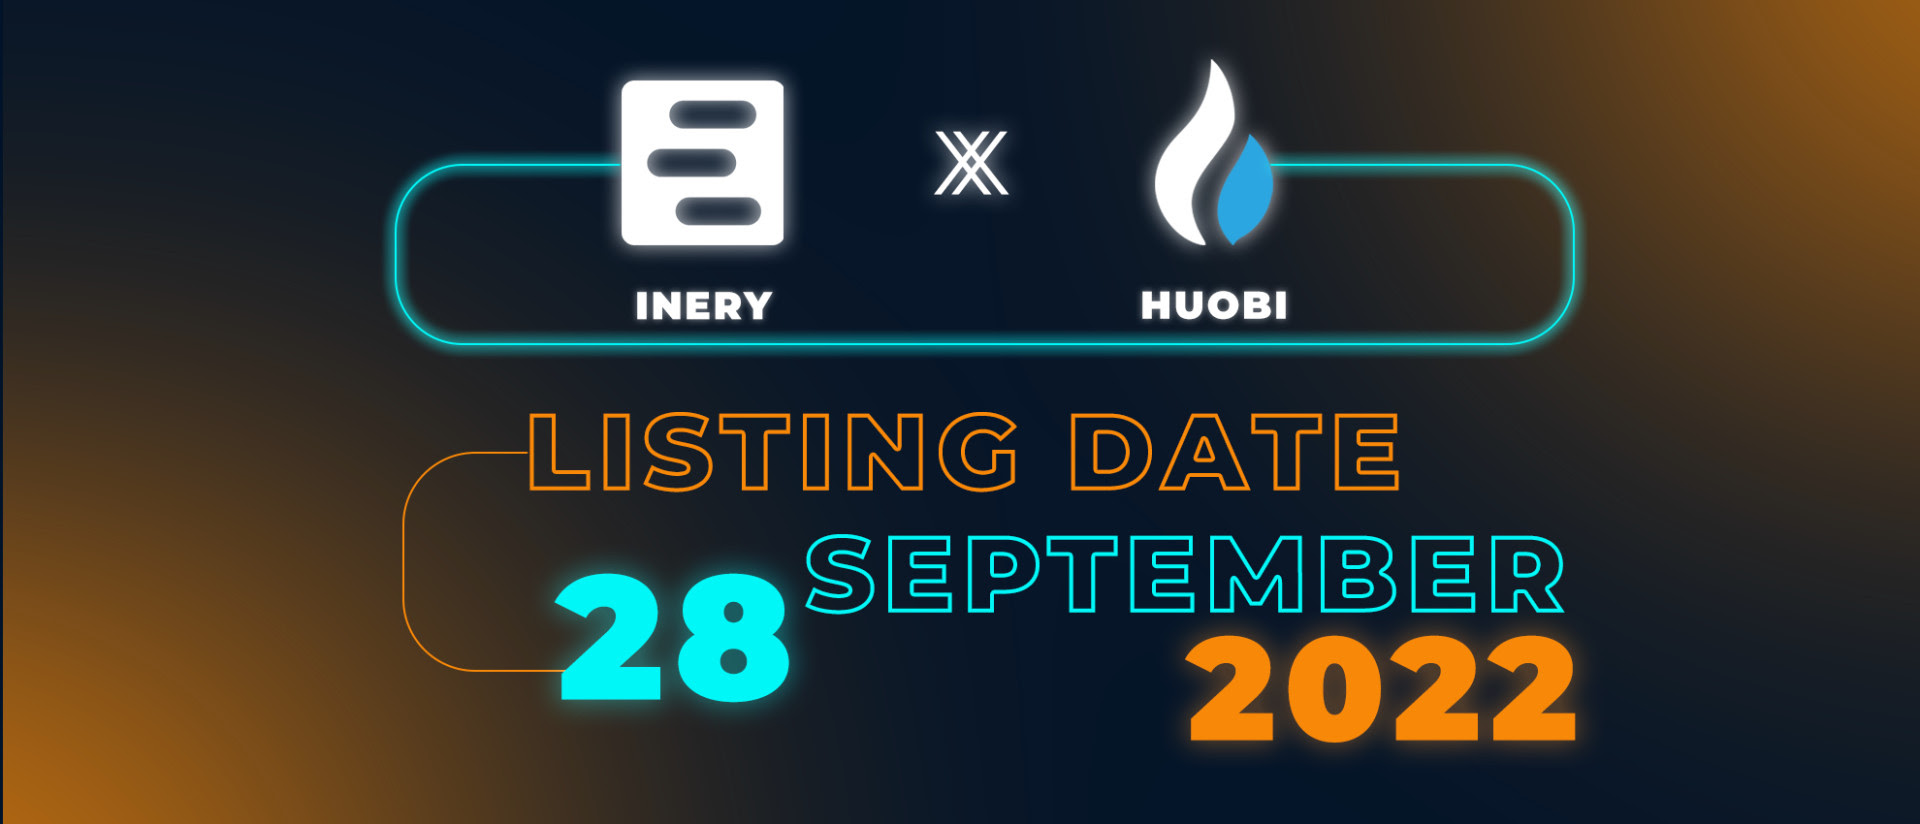 Inery Token Set to be Listed by Huobi Global on September 28th, 2022